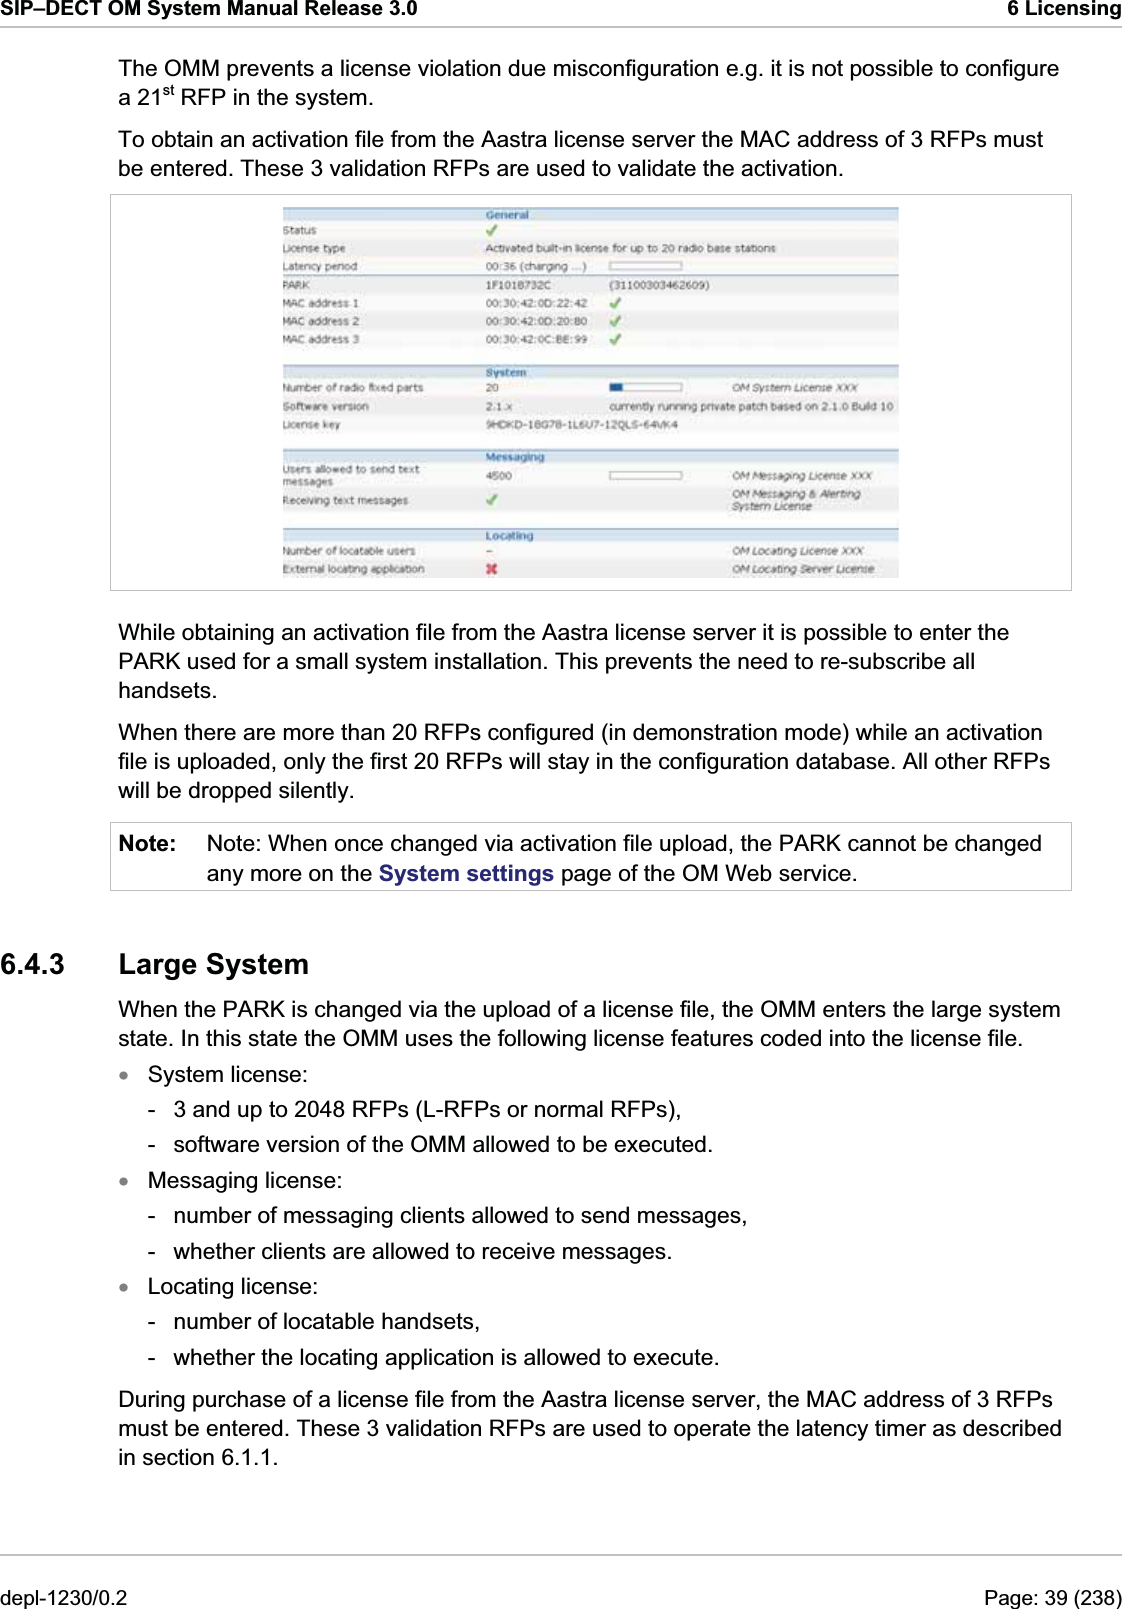 SIP–DECT OM System Manual Release 3.0  6 Licensing The OMM prevents a license violation due misconfiguration e.g. it is not possible to configure a 21st RFP in the system. To obtain an activation file from the Aastra license server the MAC address of 3 RFPs must be entered. These 3 validation RFPs are used to validate the activation.  While obtaining an activation file from the Aastra license server it is possible to enter the PARK used for a small system installation. This prevents the need to re-subscribe all handsets. When there are more than 20 RFPs configured (in demonstration mode) while an activation file is uploaded, only the first 20 RFPs will stay in the configuration database. All other RFPs will be dropped silently. Note:  Note: When once changed via activation file upload, the PARK cannot be changed any more on the System settings page of the OM Web service. 6.4.3 Large System When the PARK is changed via the upload of a license file, the OMM enters the large system state. In this state the OMM uses the following license features coded into the license file. System license: xxx-  3 and up to 2048 RFPs (L-RFPs or normal RFPs), -  software version of the OMM allowed to be executed. Messaging license: -  number of messaging clients allowed to send messages, -  whether clients are allowed to receive messages. Locating license: -  number of locatable handsets, -  whether the locating application is allowed to execute. During purchase of a license file from the Aastra license server, the MAC address of 3 RFPs must be entered. These 3 validation RFPs are used to operate the latency timer as described in section 6.1.1. depl-1230/0.2  Page: 39 (238) 